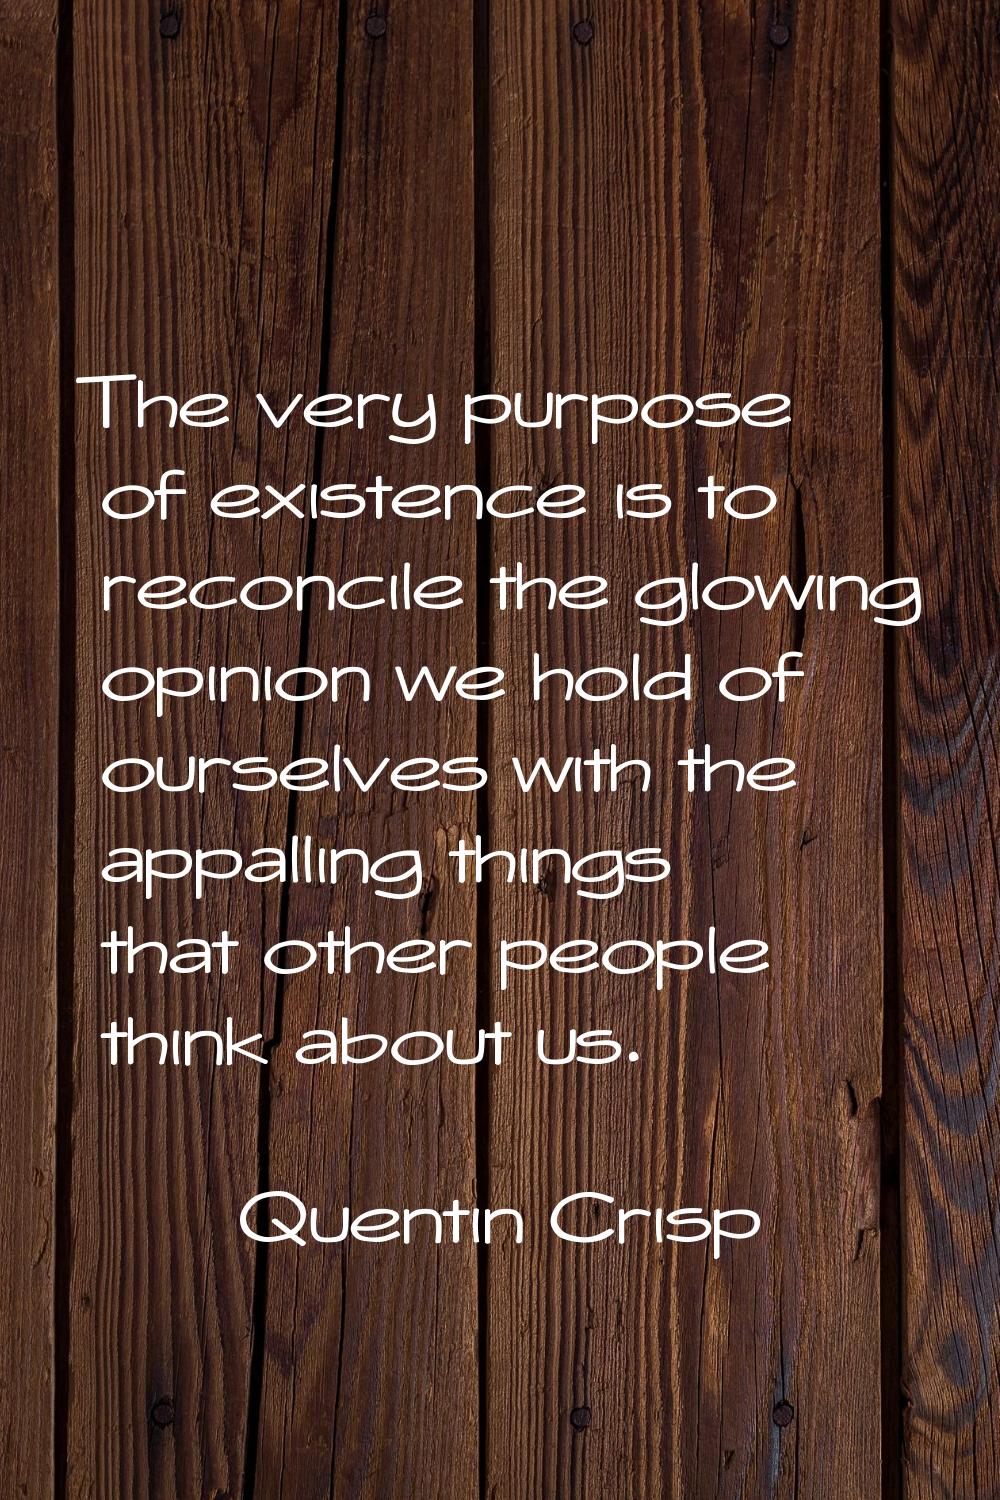 The very purpose of existence is to reconcile the glowing opinion we hold of ourselves with the app